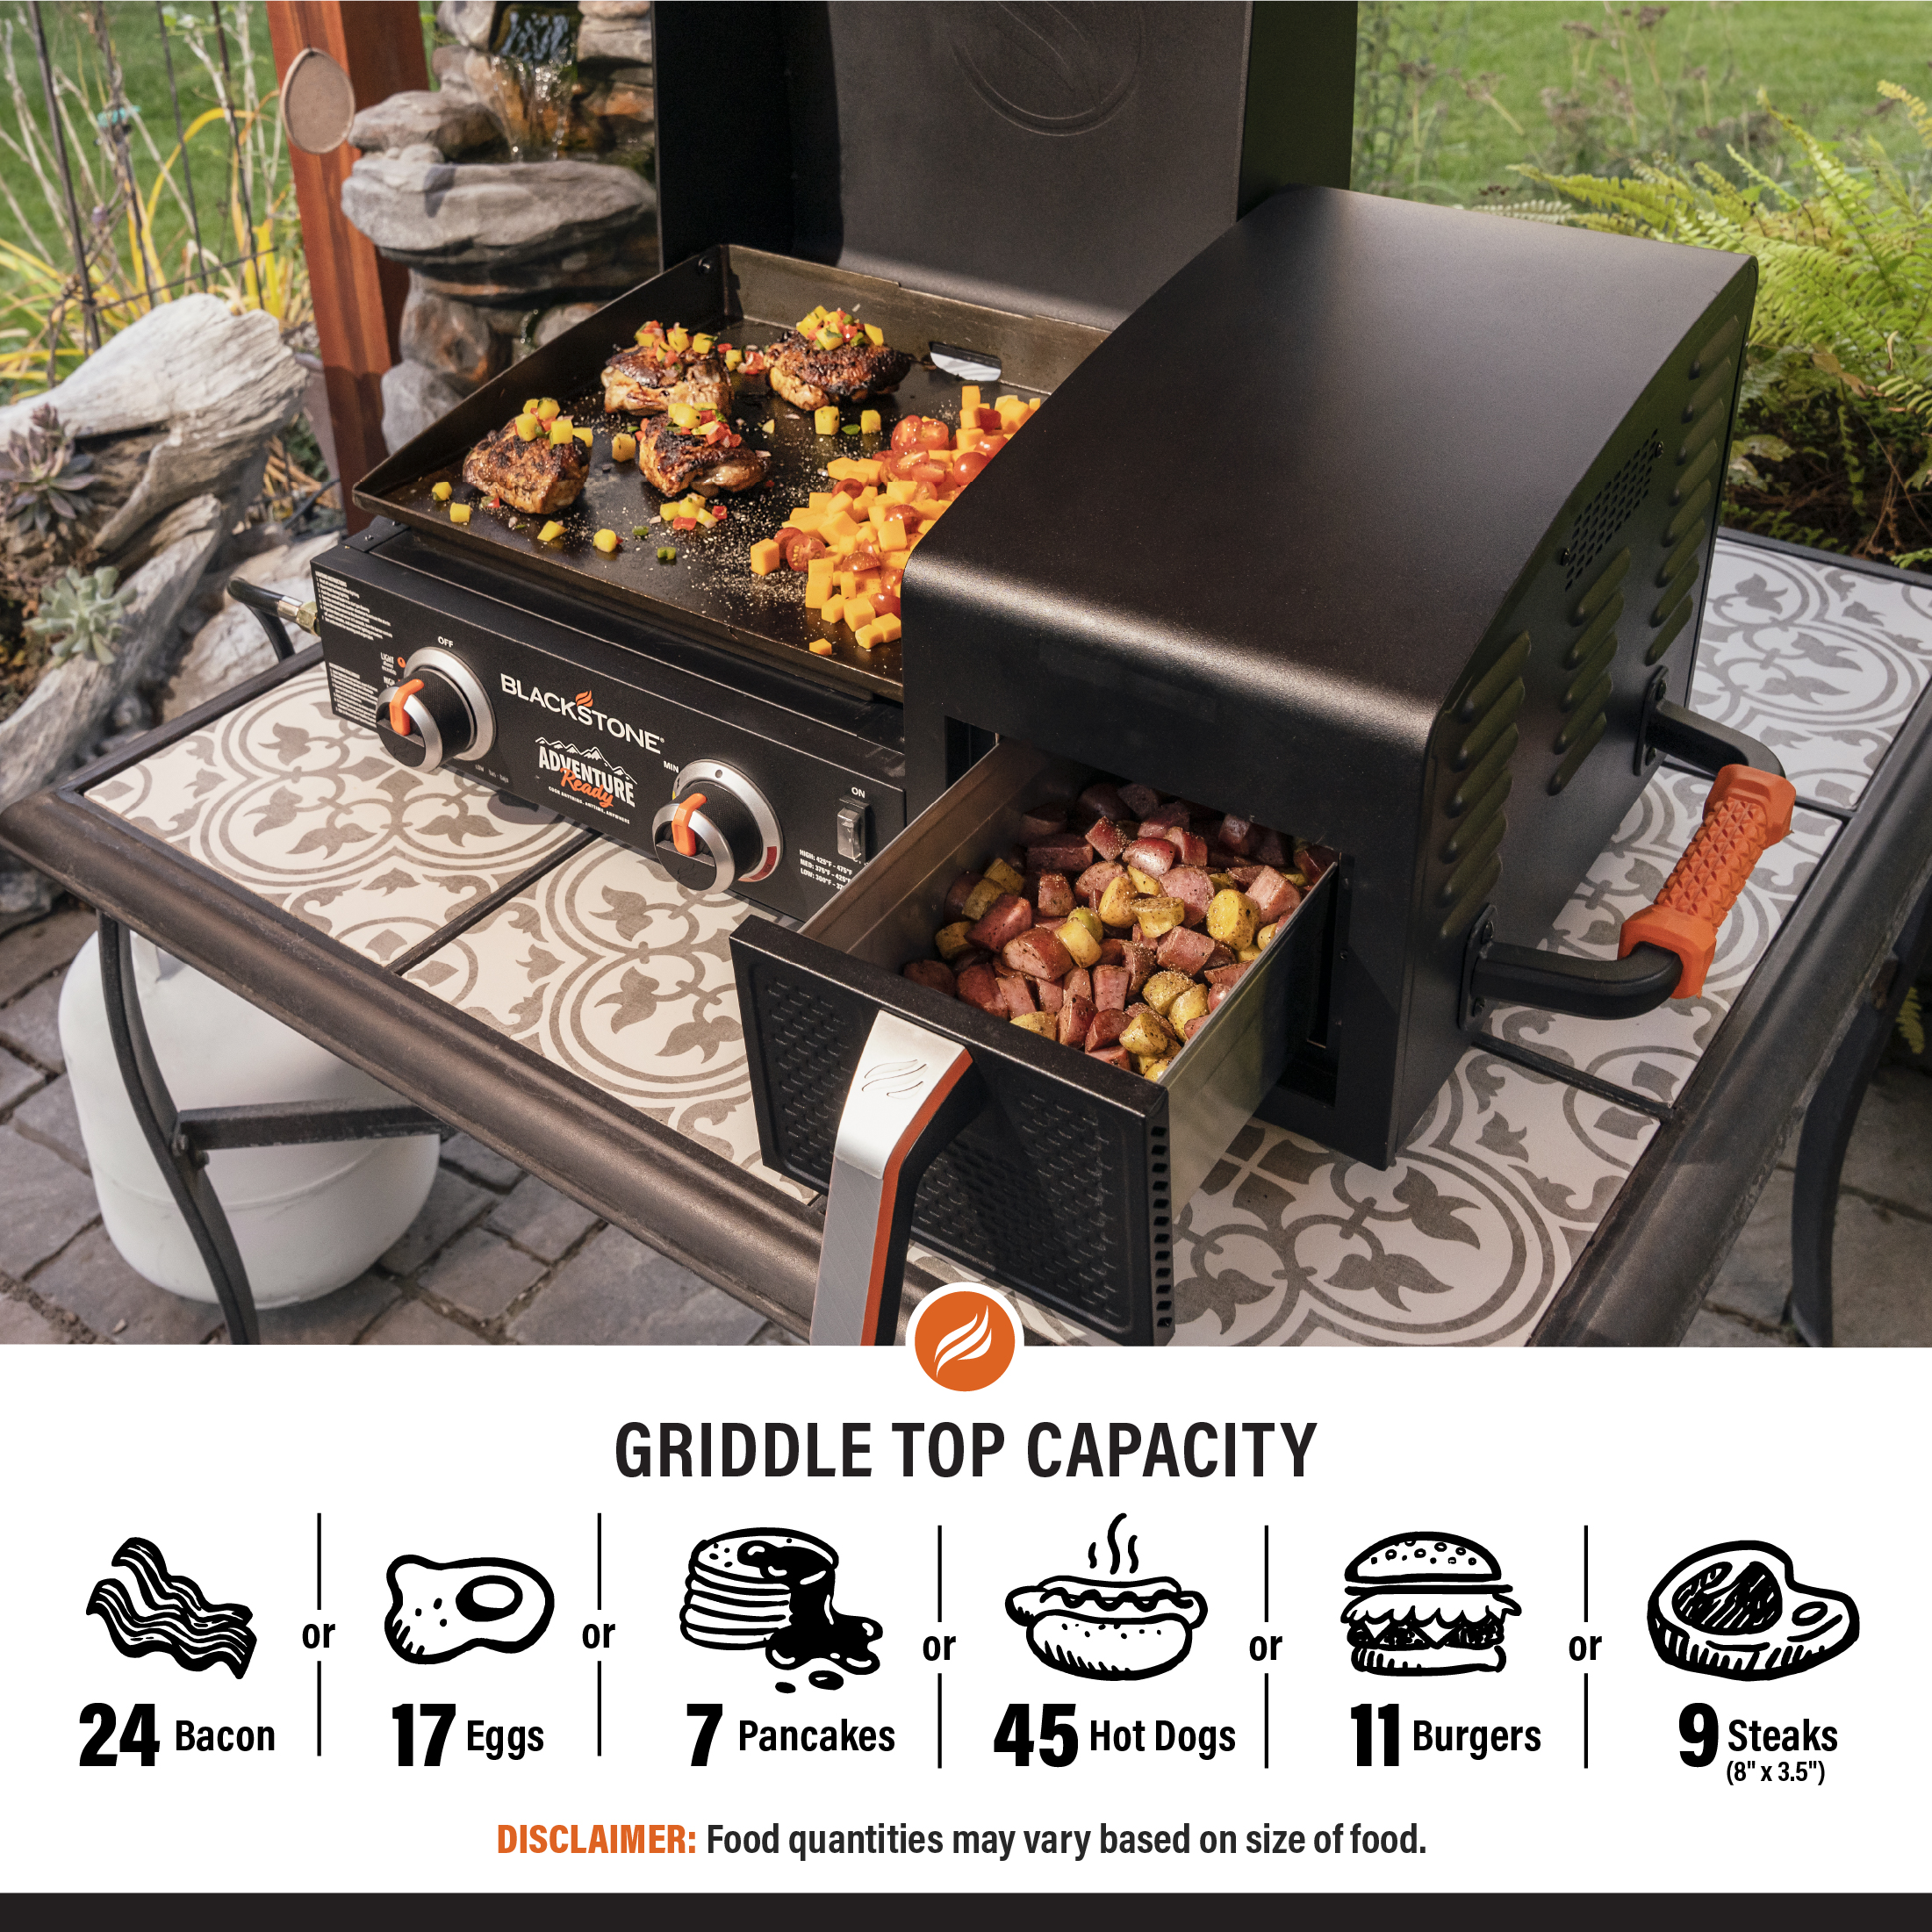 Blackstone Adventure Ready 17" Griddle with Electric Air Fryer - image 5 of 10